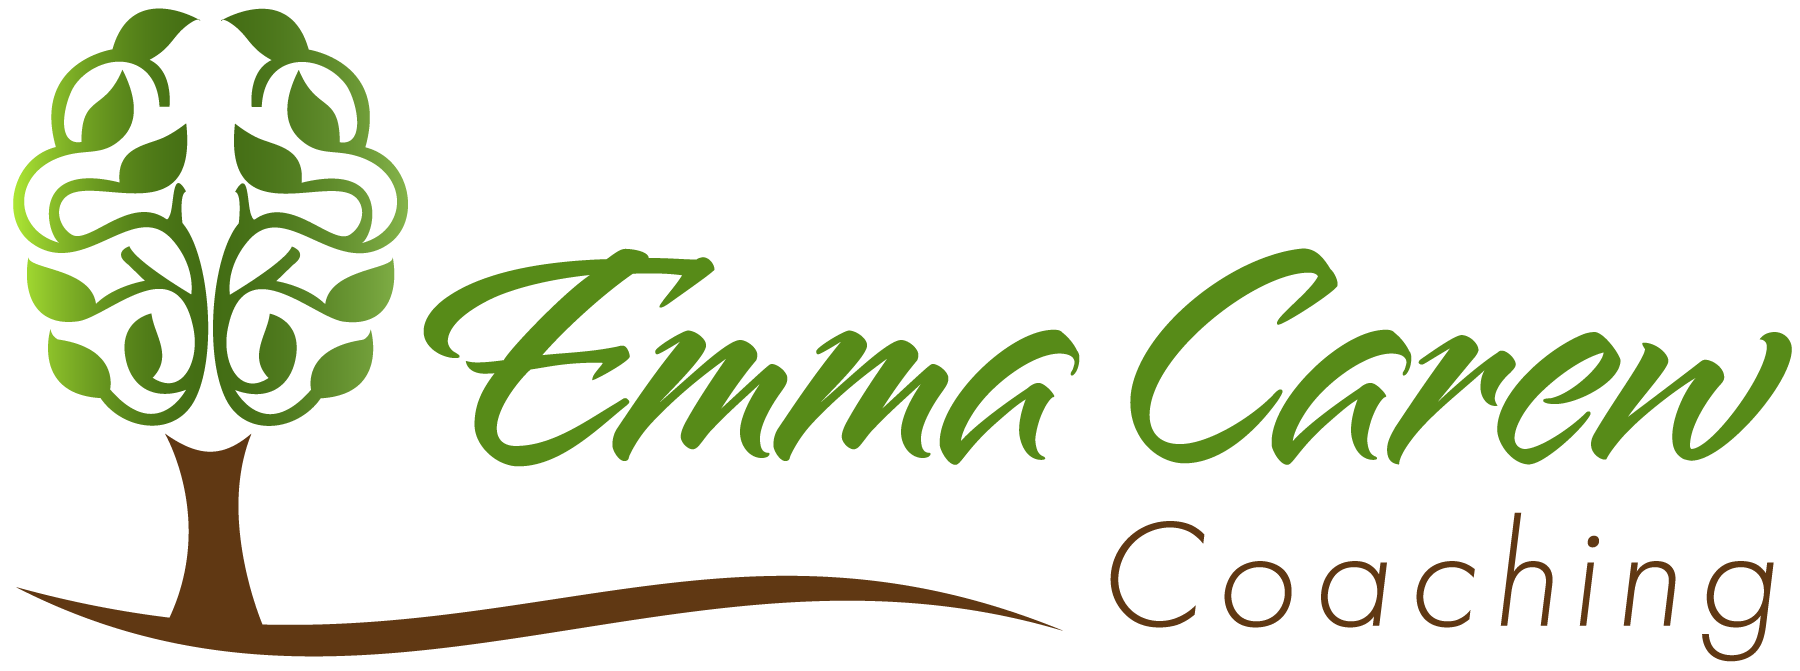 A green banner with the name of emma and the words " emma."